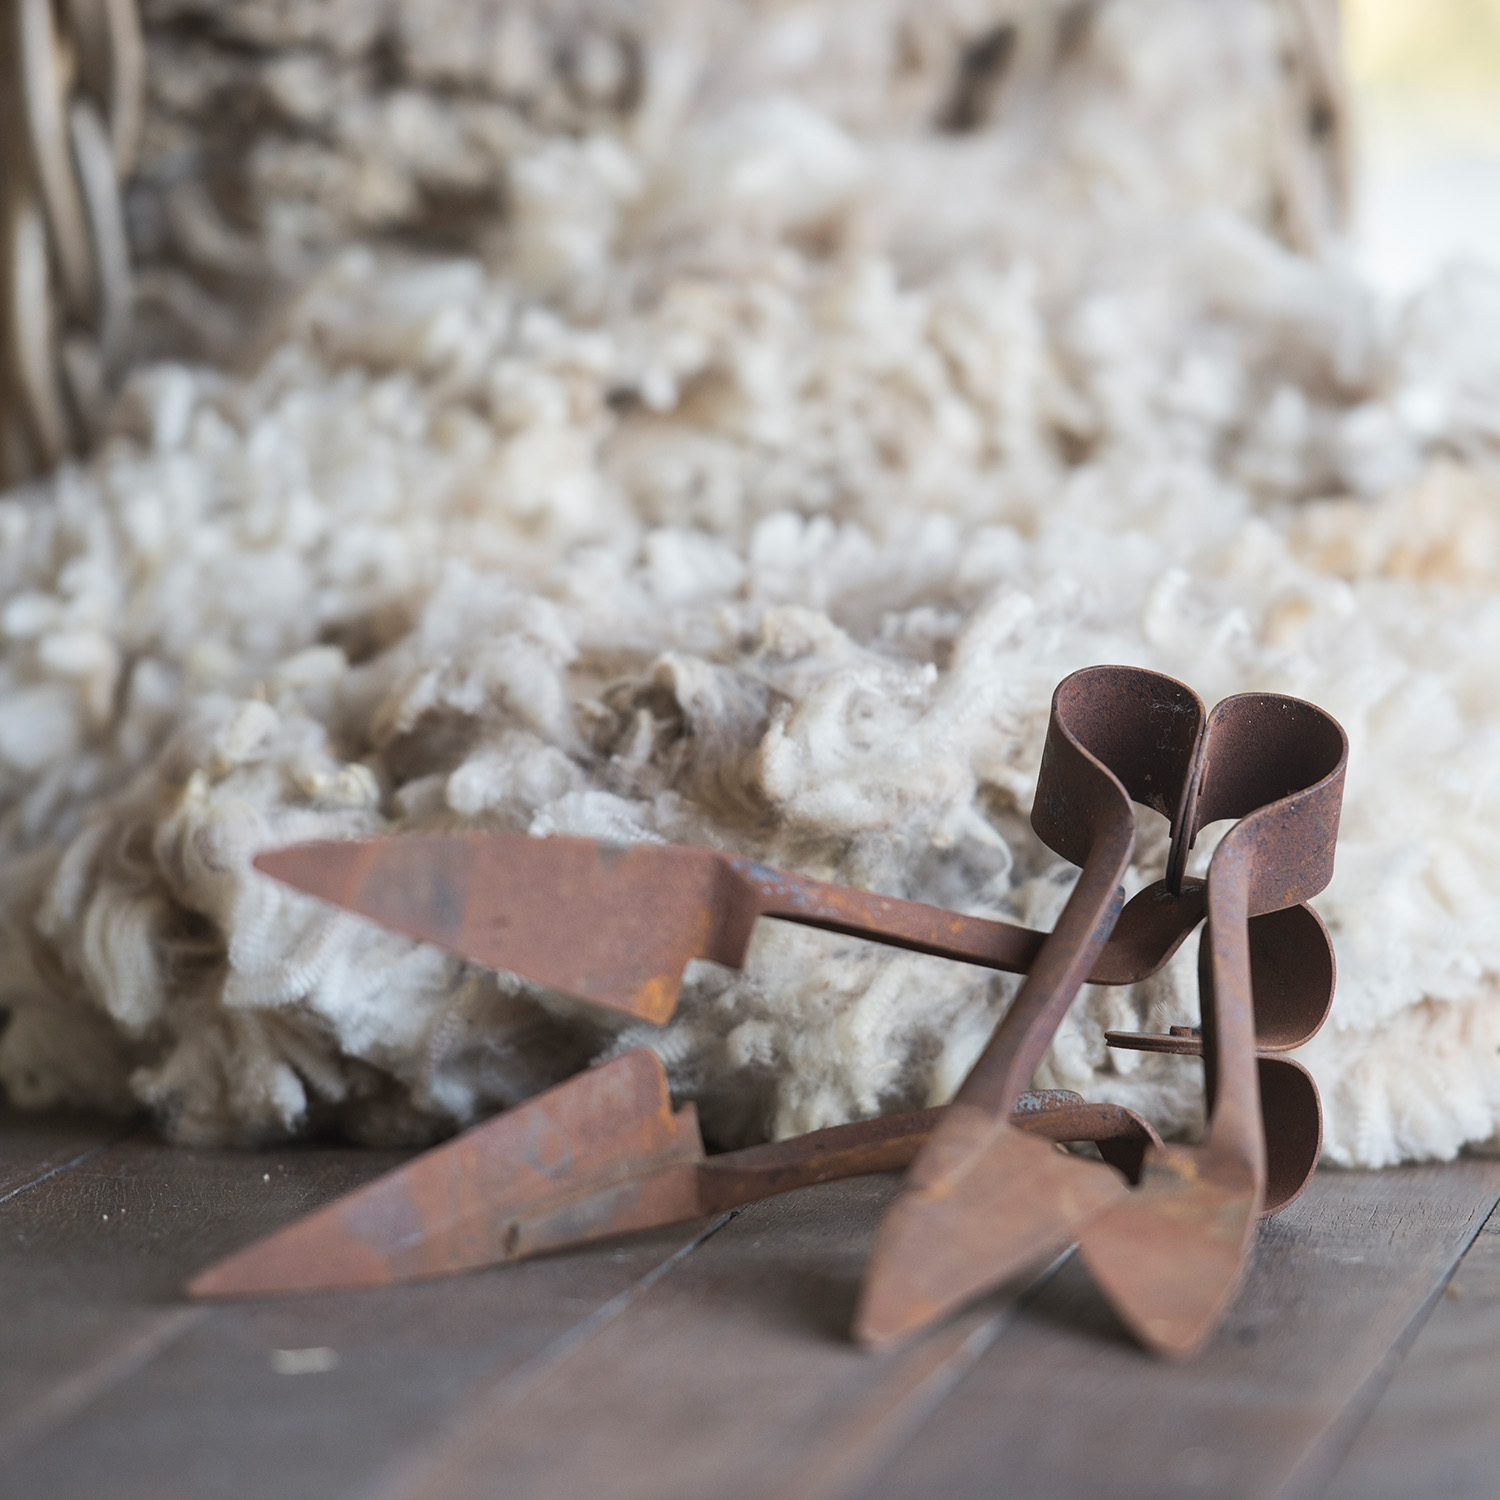 Two pairs of shears sat in front of a pile of wool.